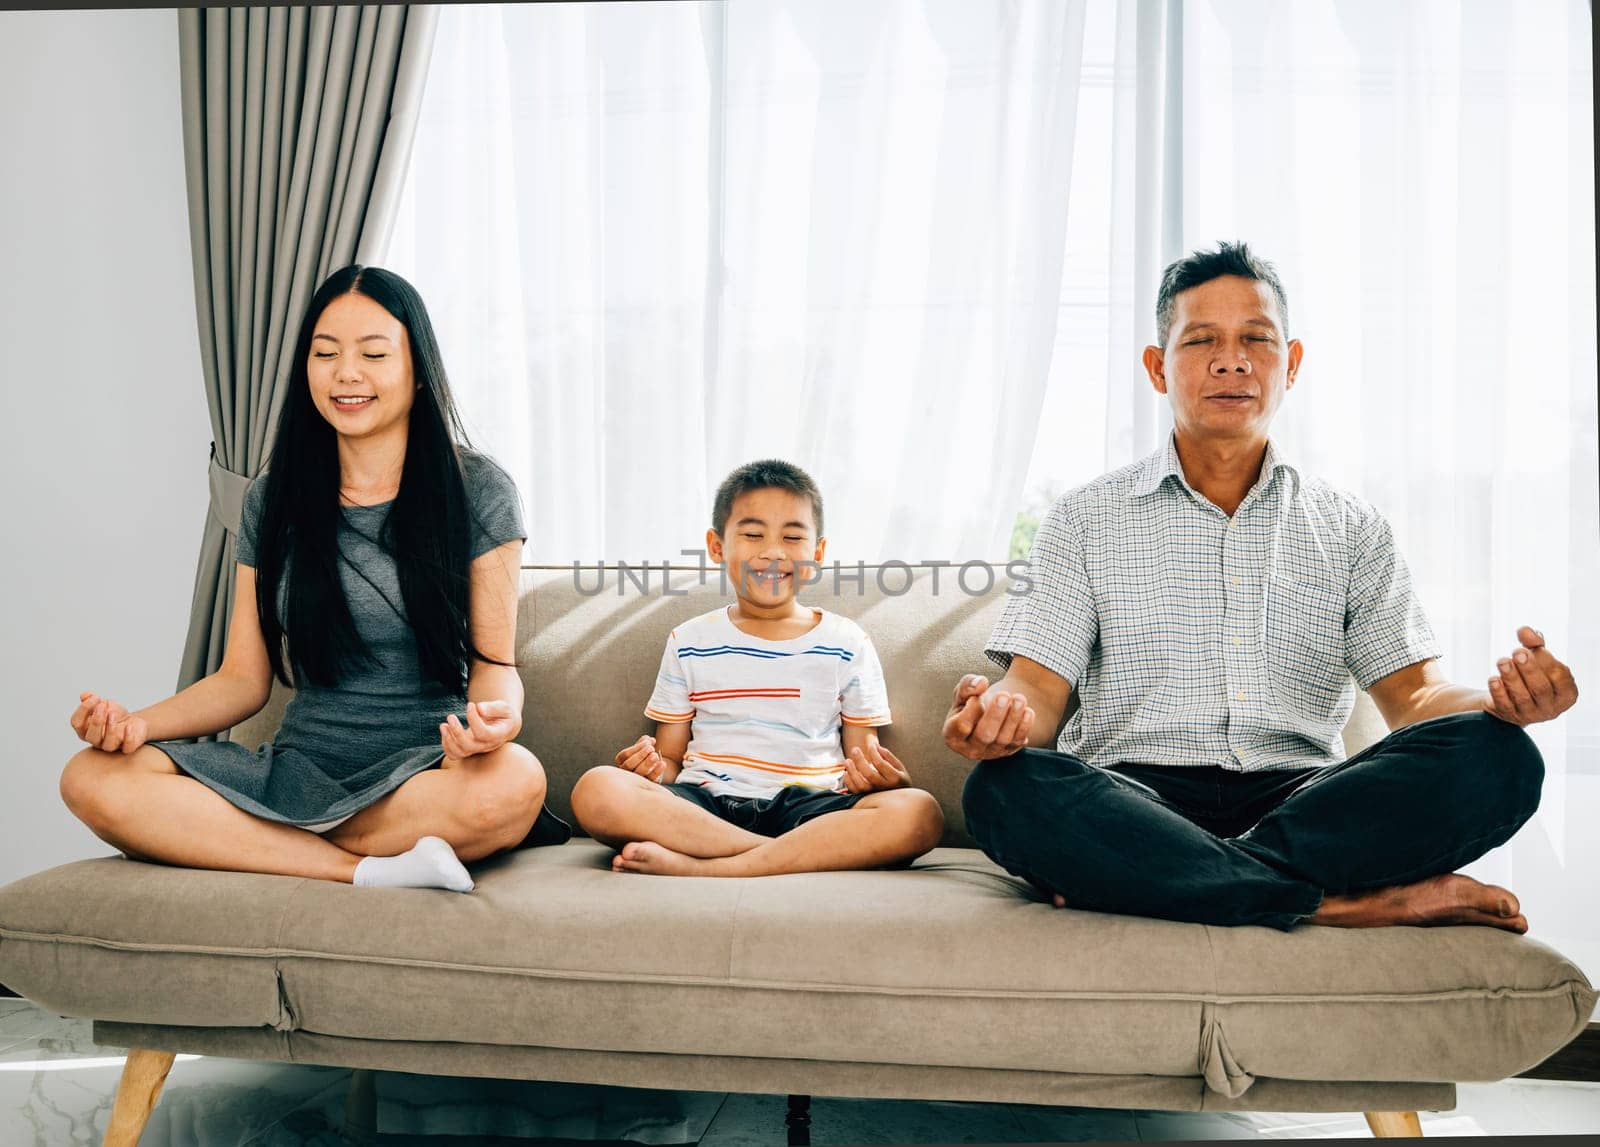 Mindful meditation on a sofa as a young family practices yoga together by Sorapop